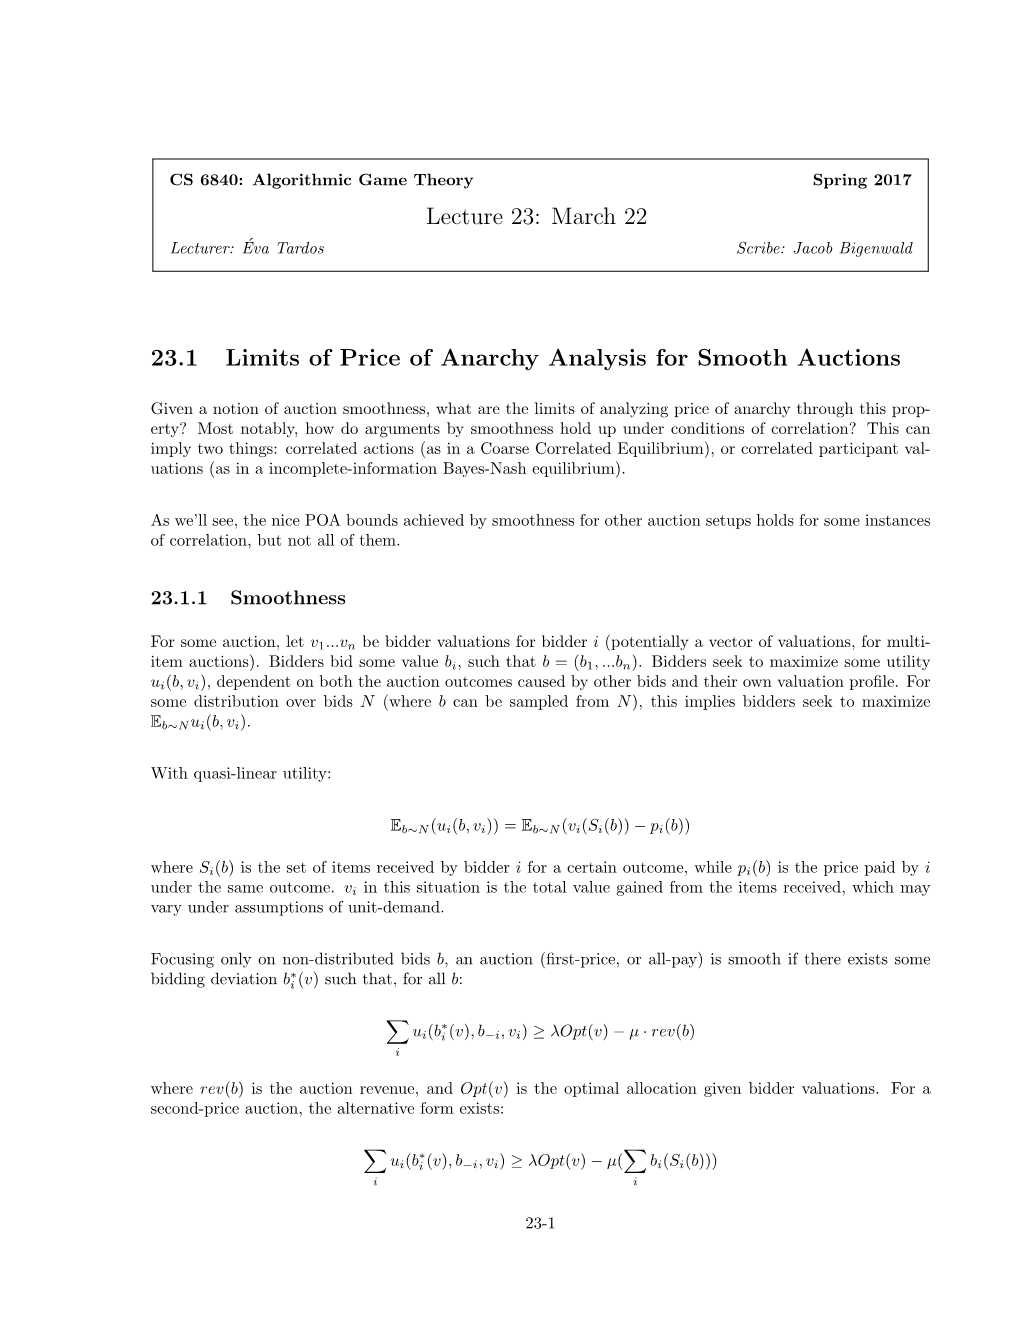 March 22 23.1 Limits of Price of Anarchy Analysis for Smooth Auctions